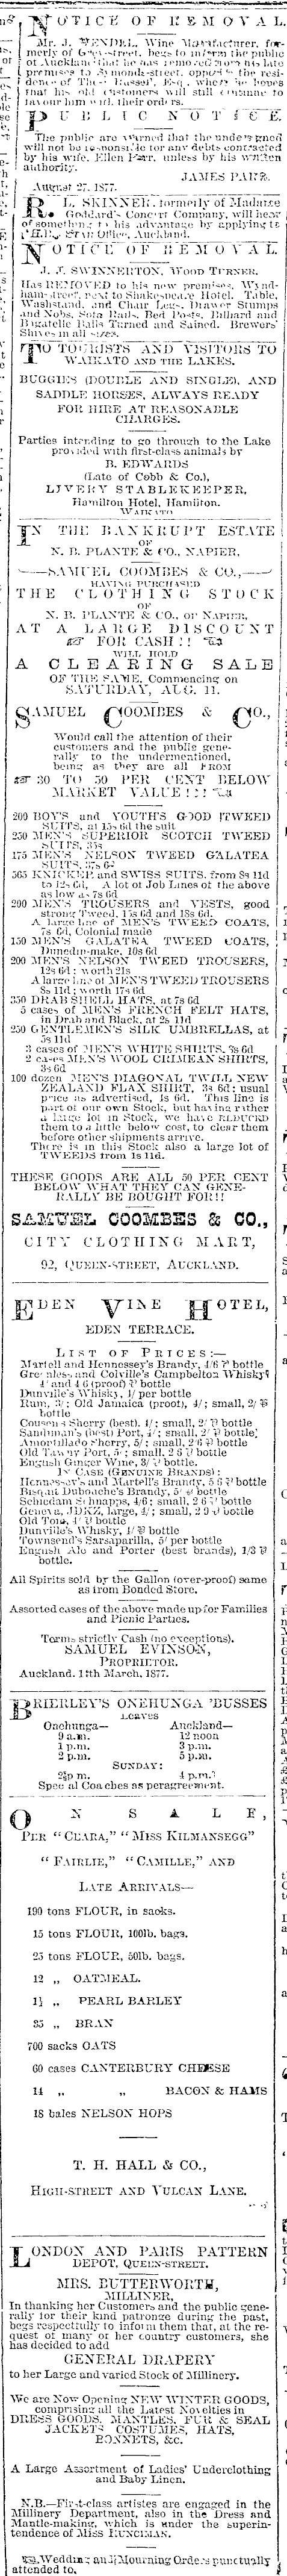 Papers Past Newspapers Auckland Star 27 August 1877 Page 3 Advertisements Column 3